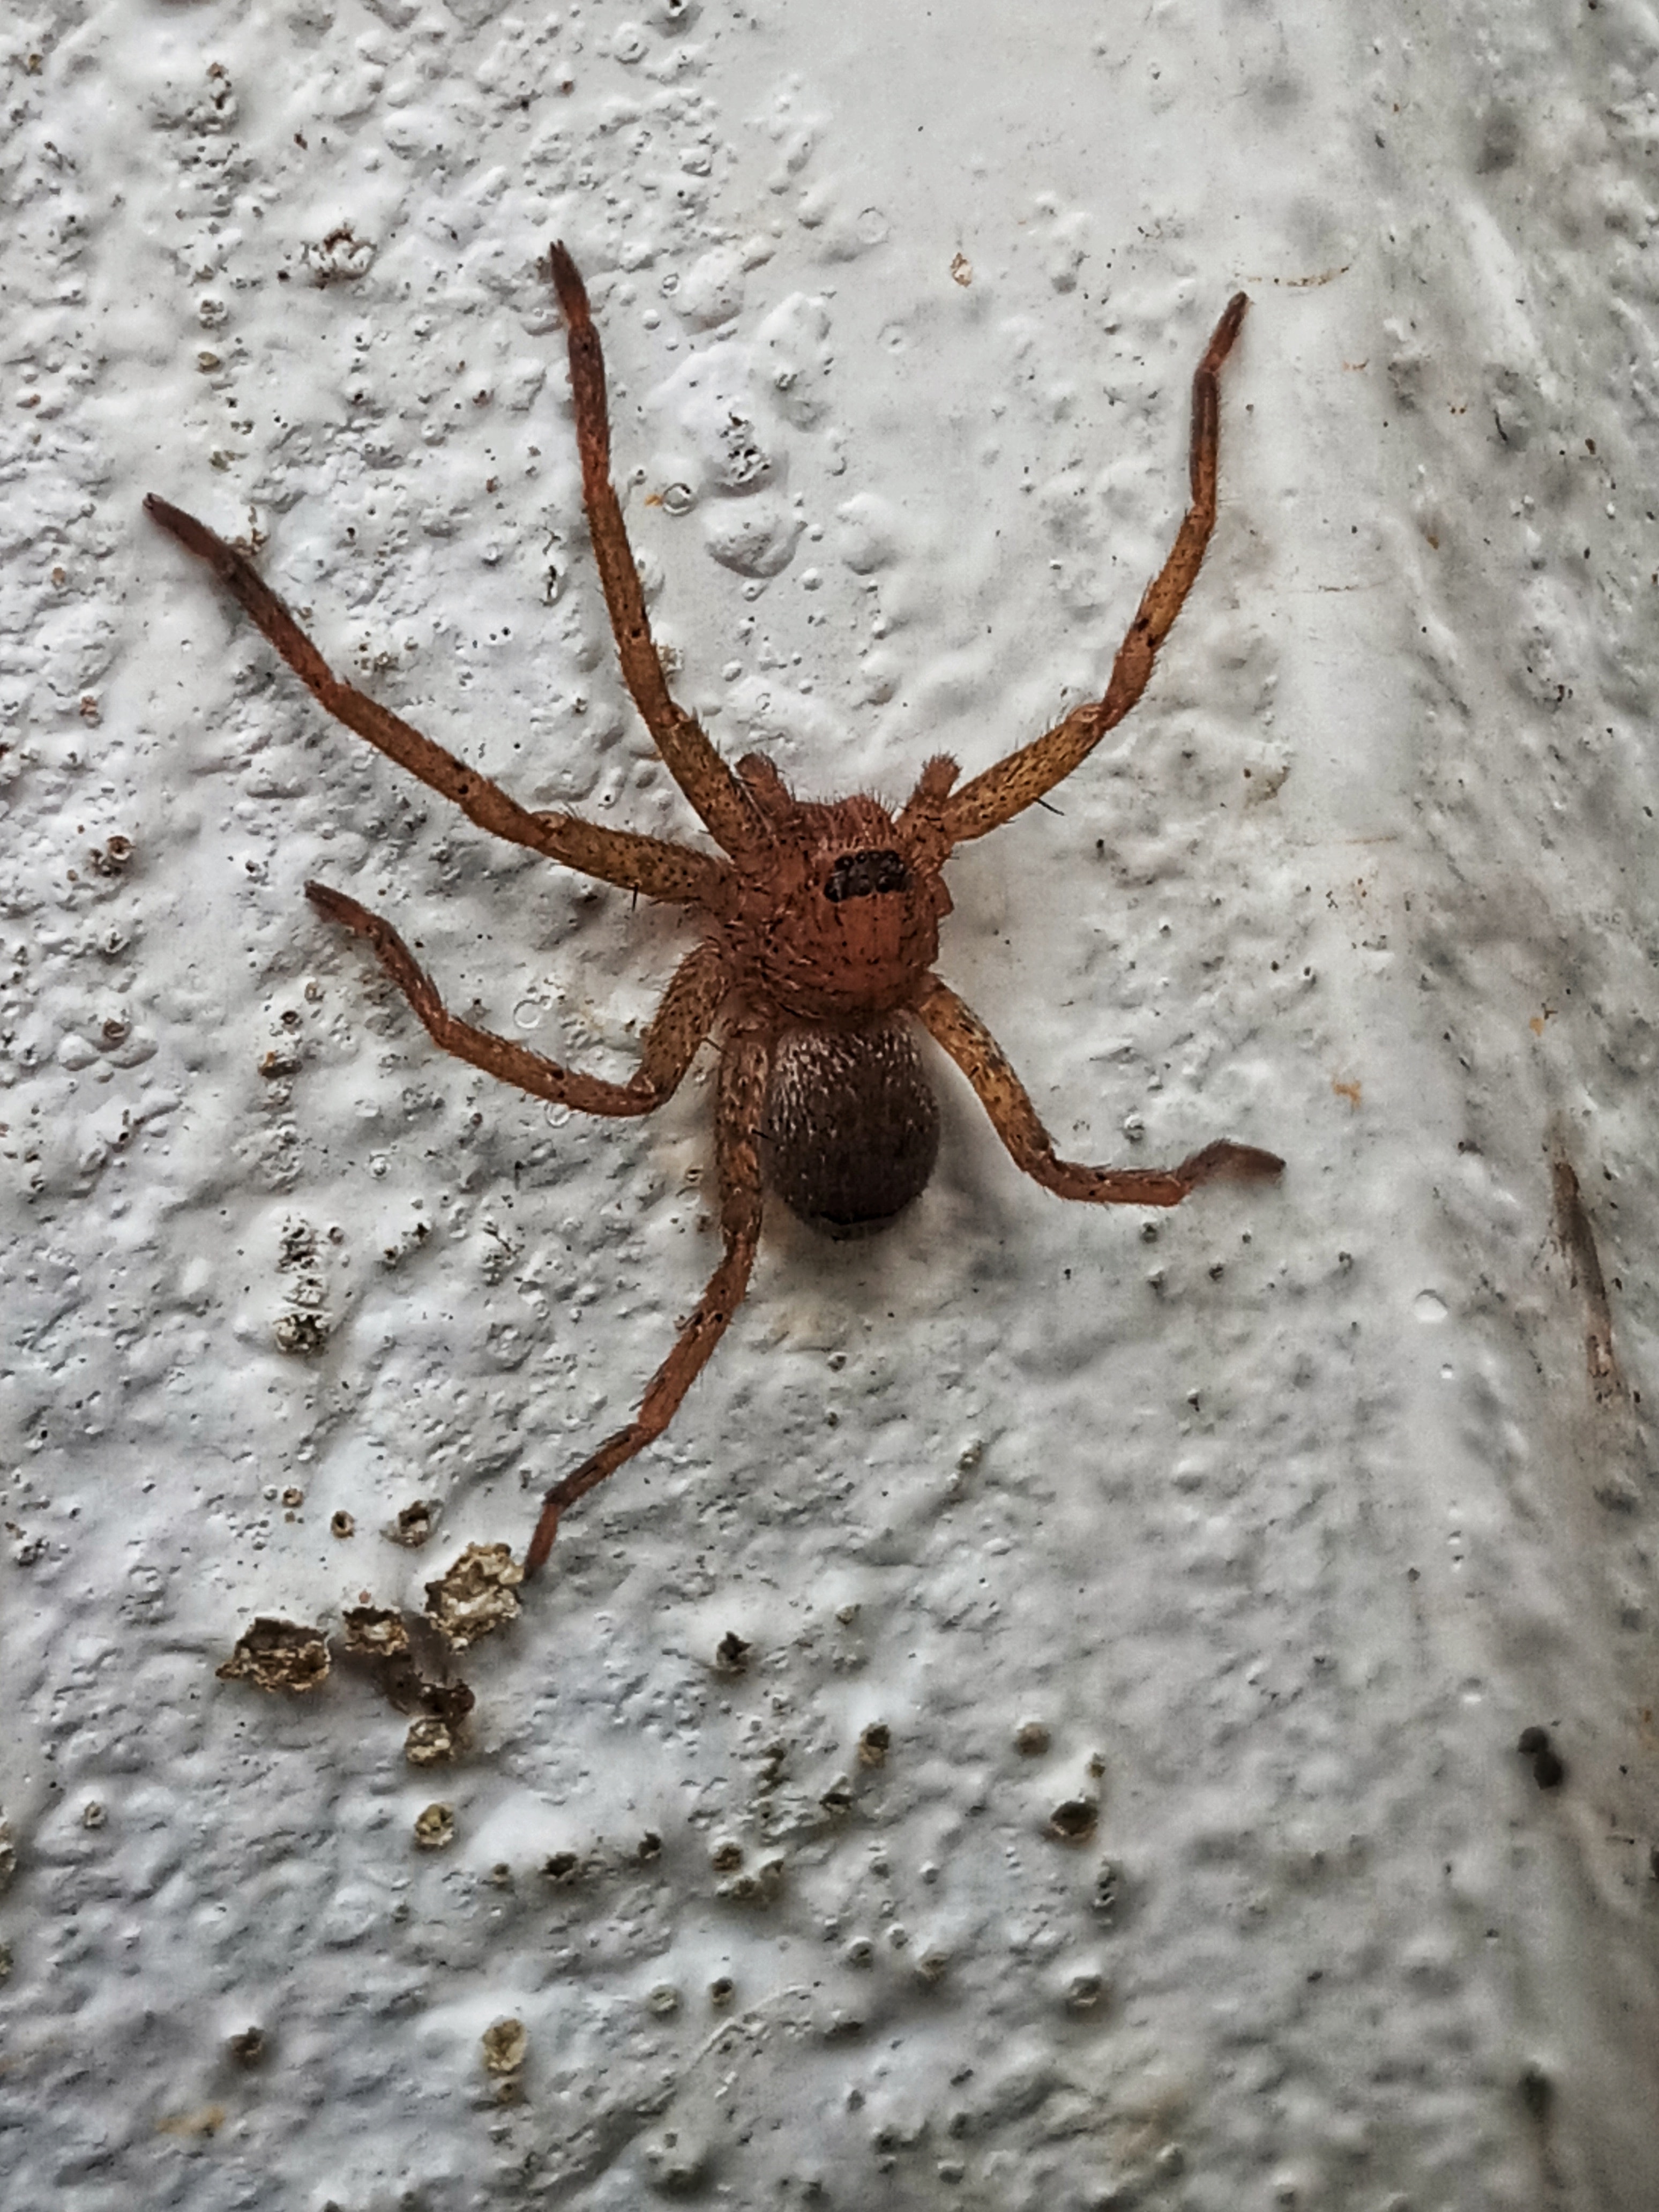 Picture of Sparassidae (Giant Crab Spiders) - Dorsal